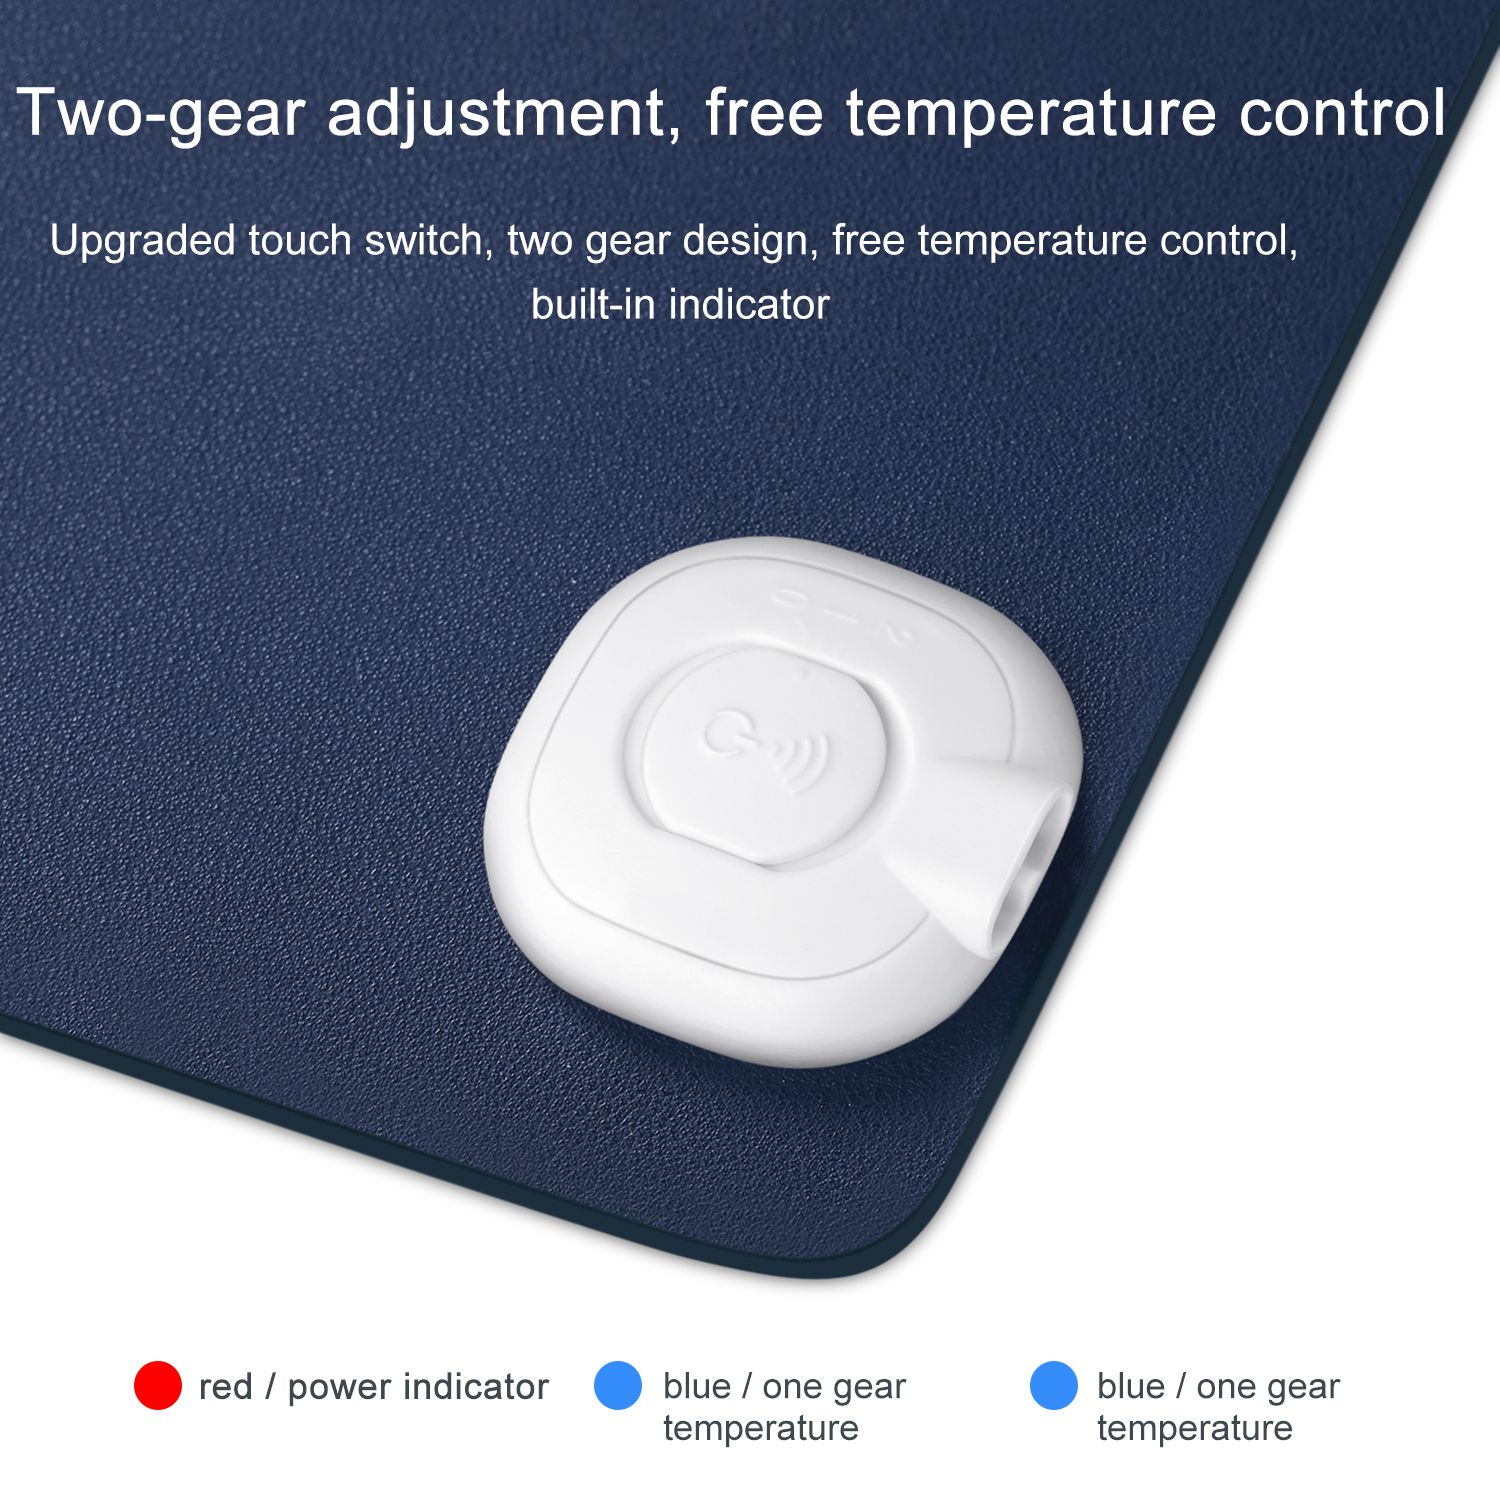 BUBM-JRZD-B-Heating-Pad-Desktop-Mouse-Pad-Warm-Table-Mat-Electric-Heating-Plate-Writing-Mat-for-Offi-1620477